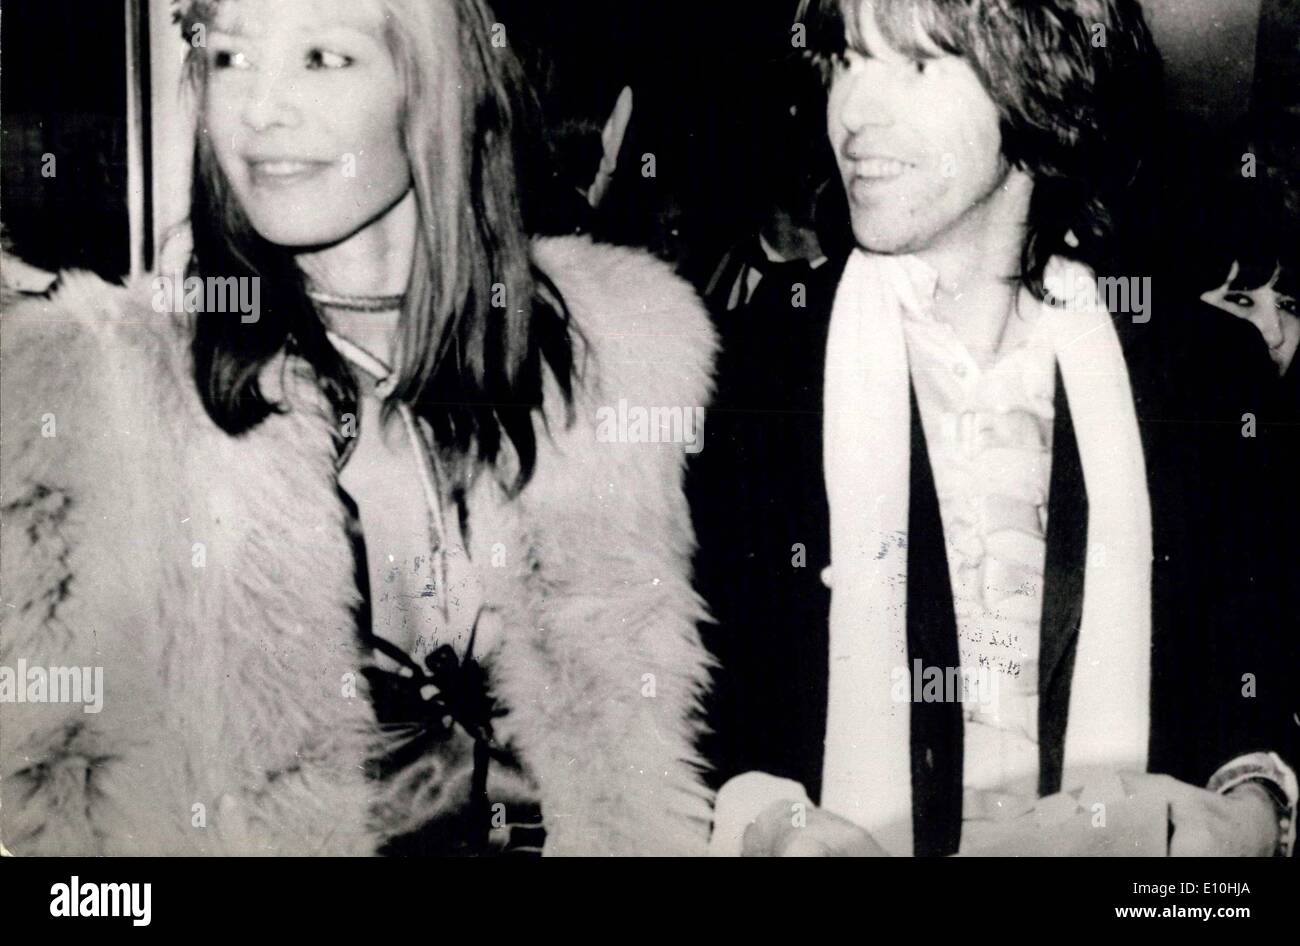 Dec. 06, 1972 - Police Hunt For Rolling Stone Keith Richard. Rolling Stone Keith Richard is being sought by French police in connection with alleged drugs offences. Warrants for the arrest of Richard and his girl friend, actress Anita Pallenberg, were issued by a magistrate in Nice. Mick Jagger and the other three members of the Rolling Stones have been charged with illegal use of heroin and other narcotics, police said in Nice. Photo Shows: Rolling Stone Keith Richard pictured with Anita Pallenberg. Stock Photo